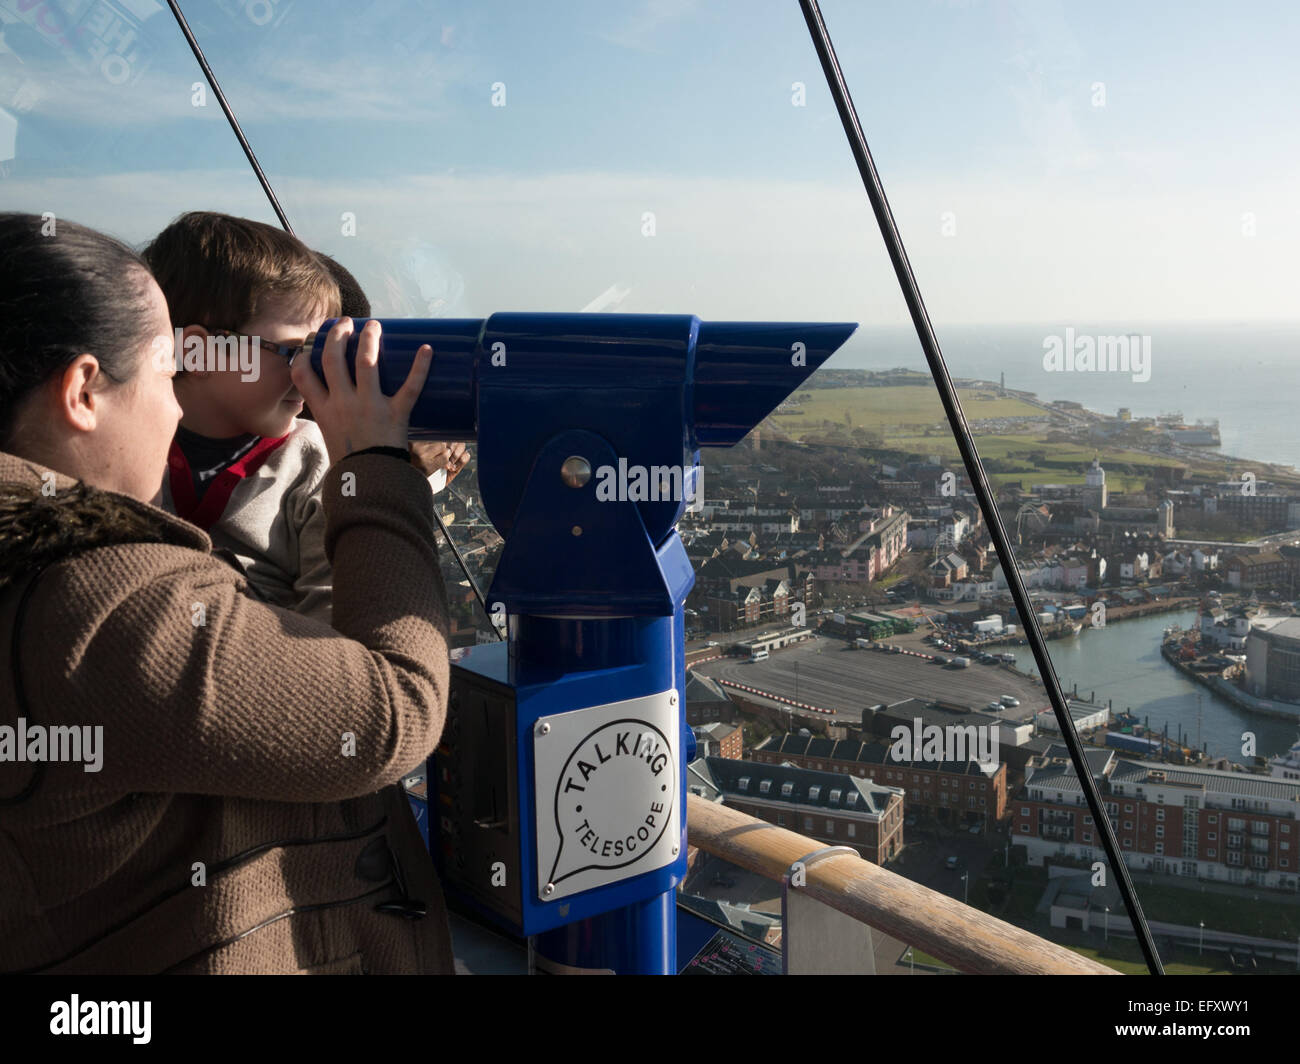 A mother and child look through a talking telescope on view deck number one of the Spinnaker tower, Portsmouth, England Stock Photo